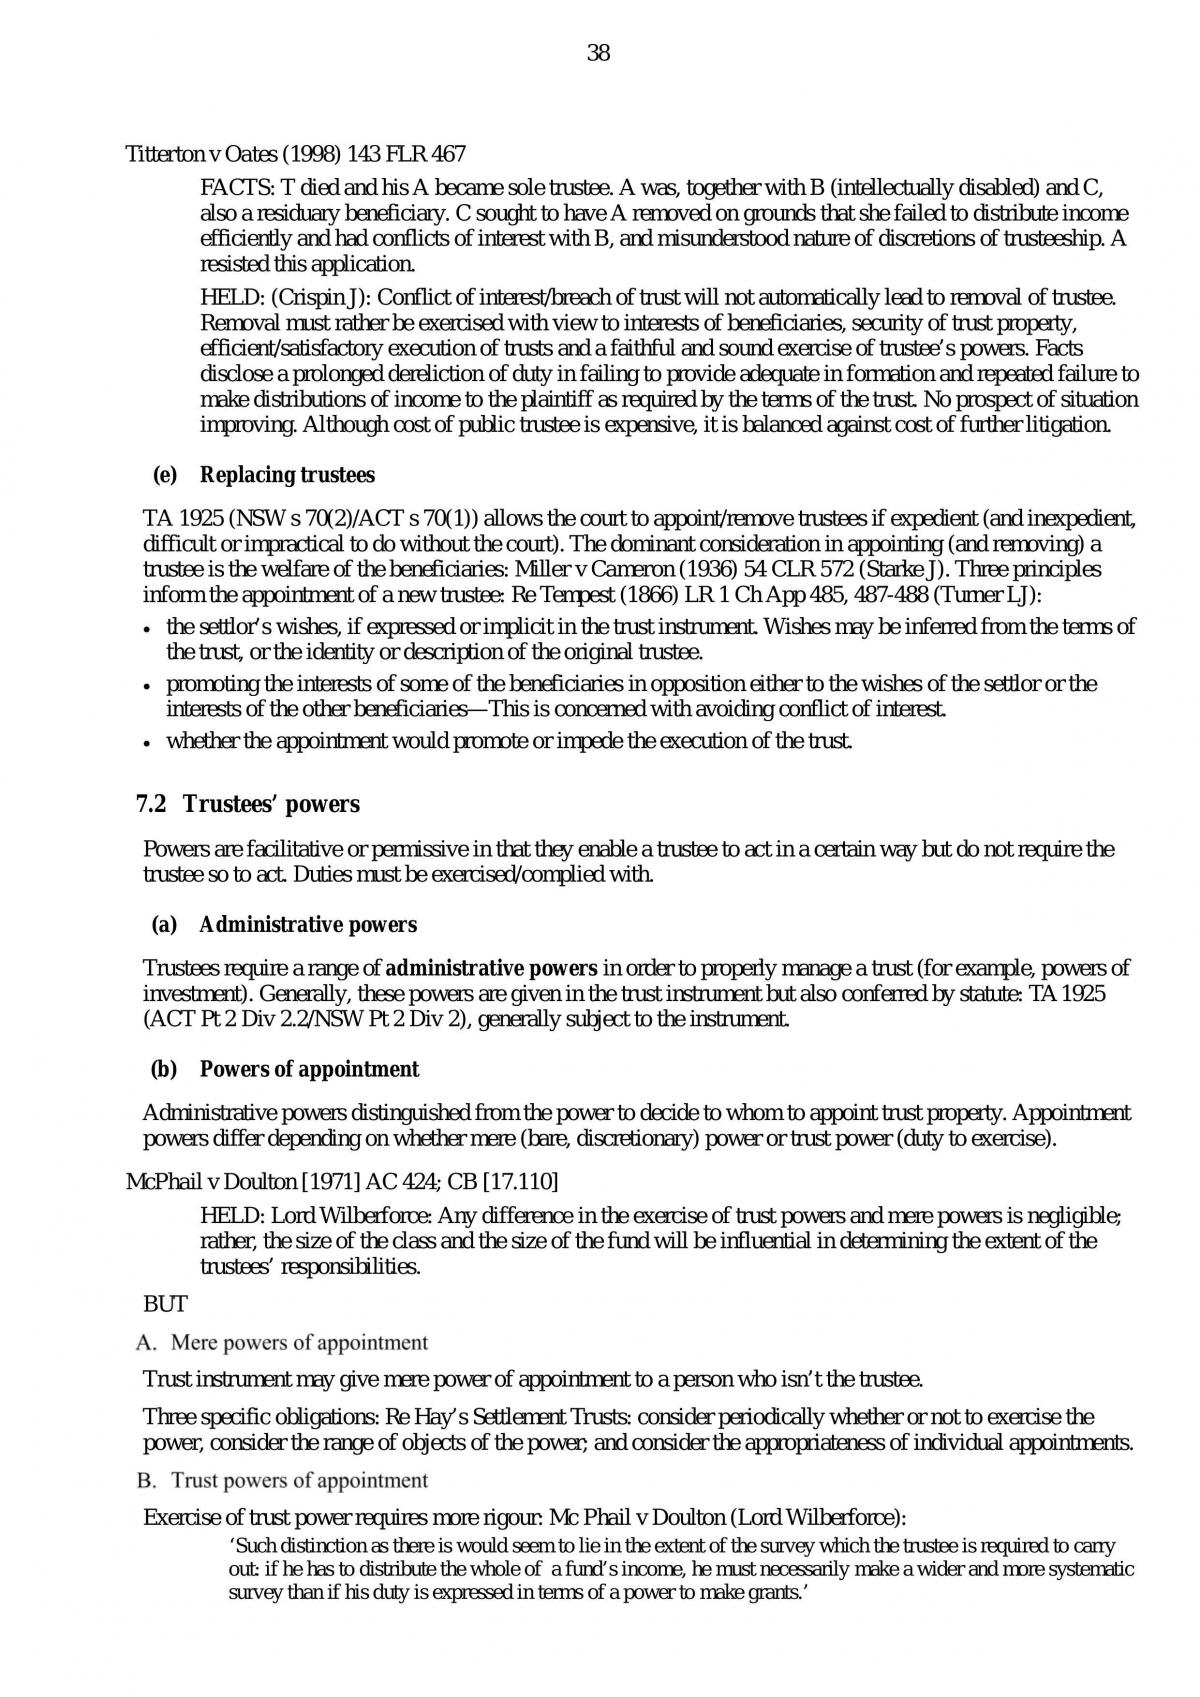 Complete Notes for LAWS6205 - Equity and Trusts - Page 38